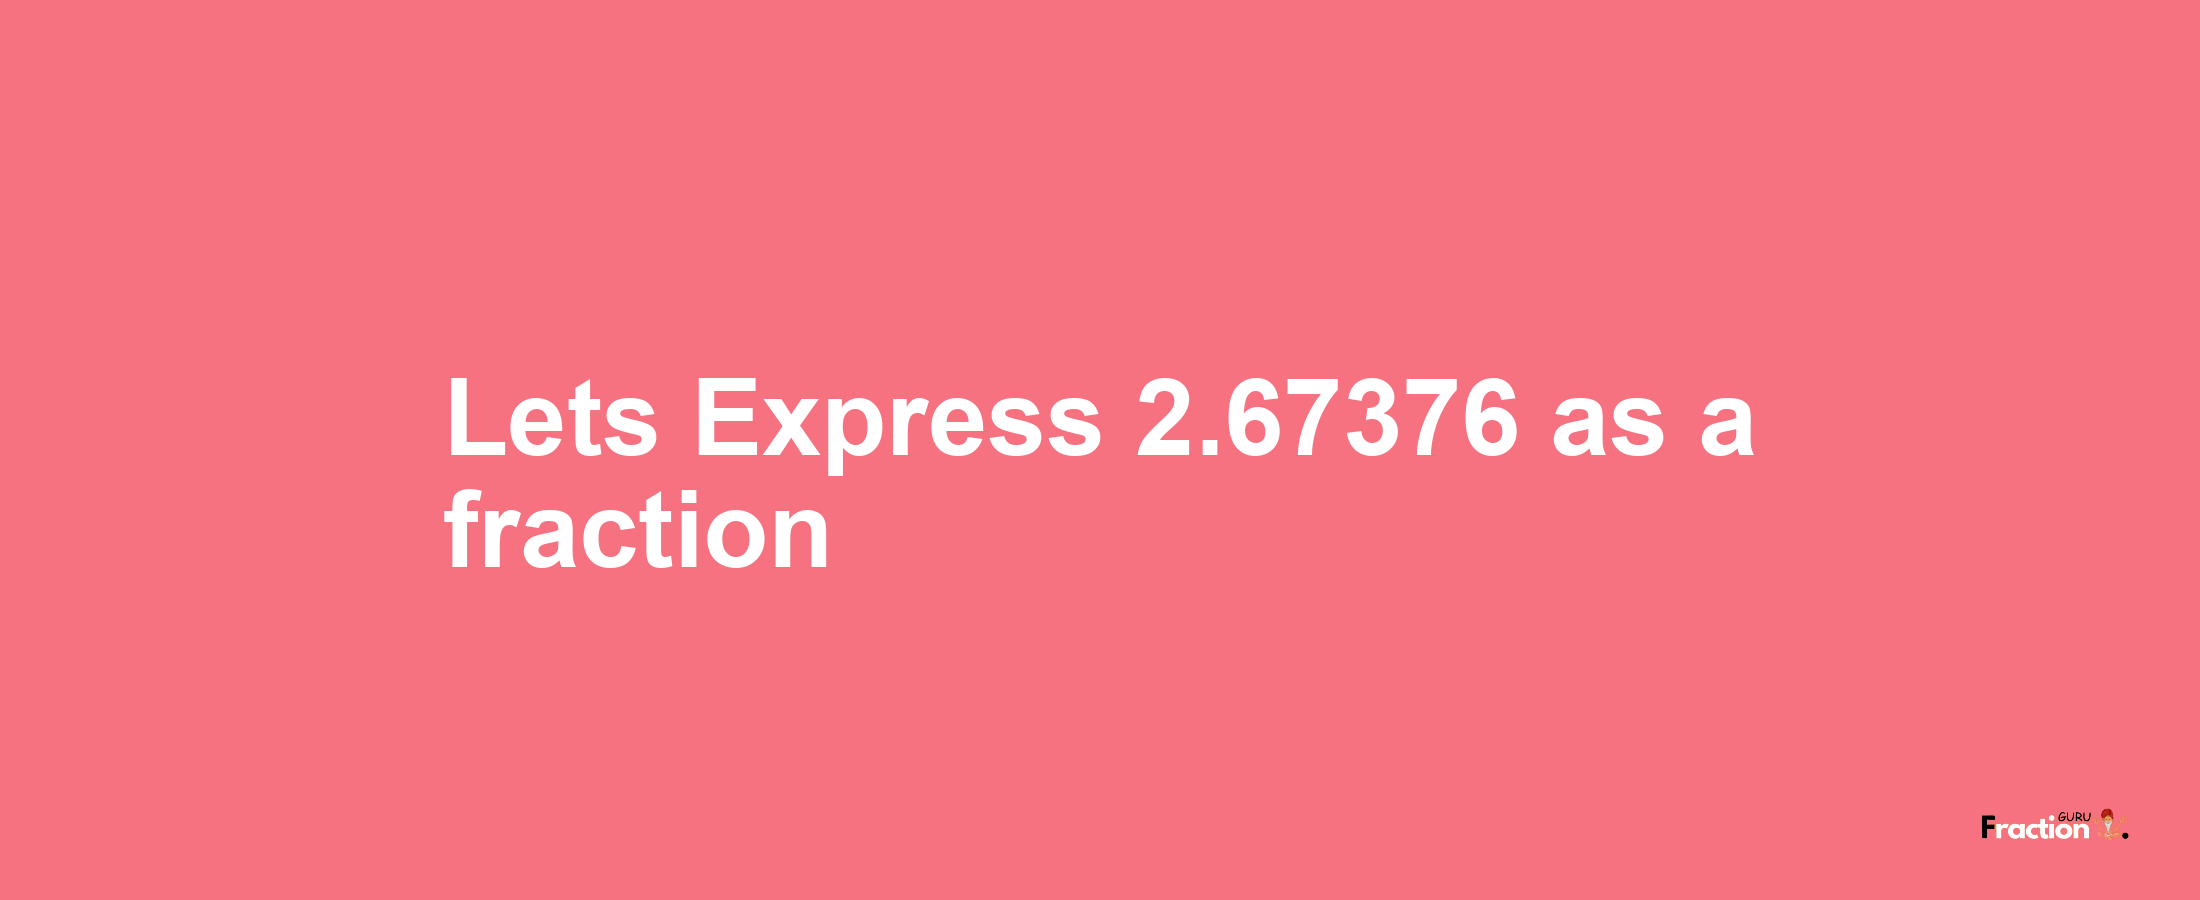 Lets Express 2.67376 as afraction